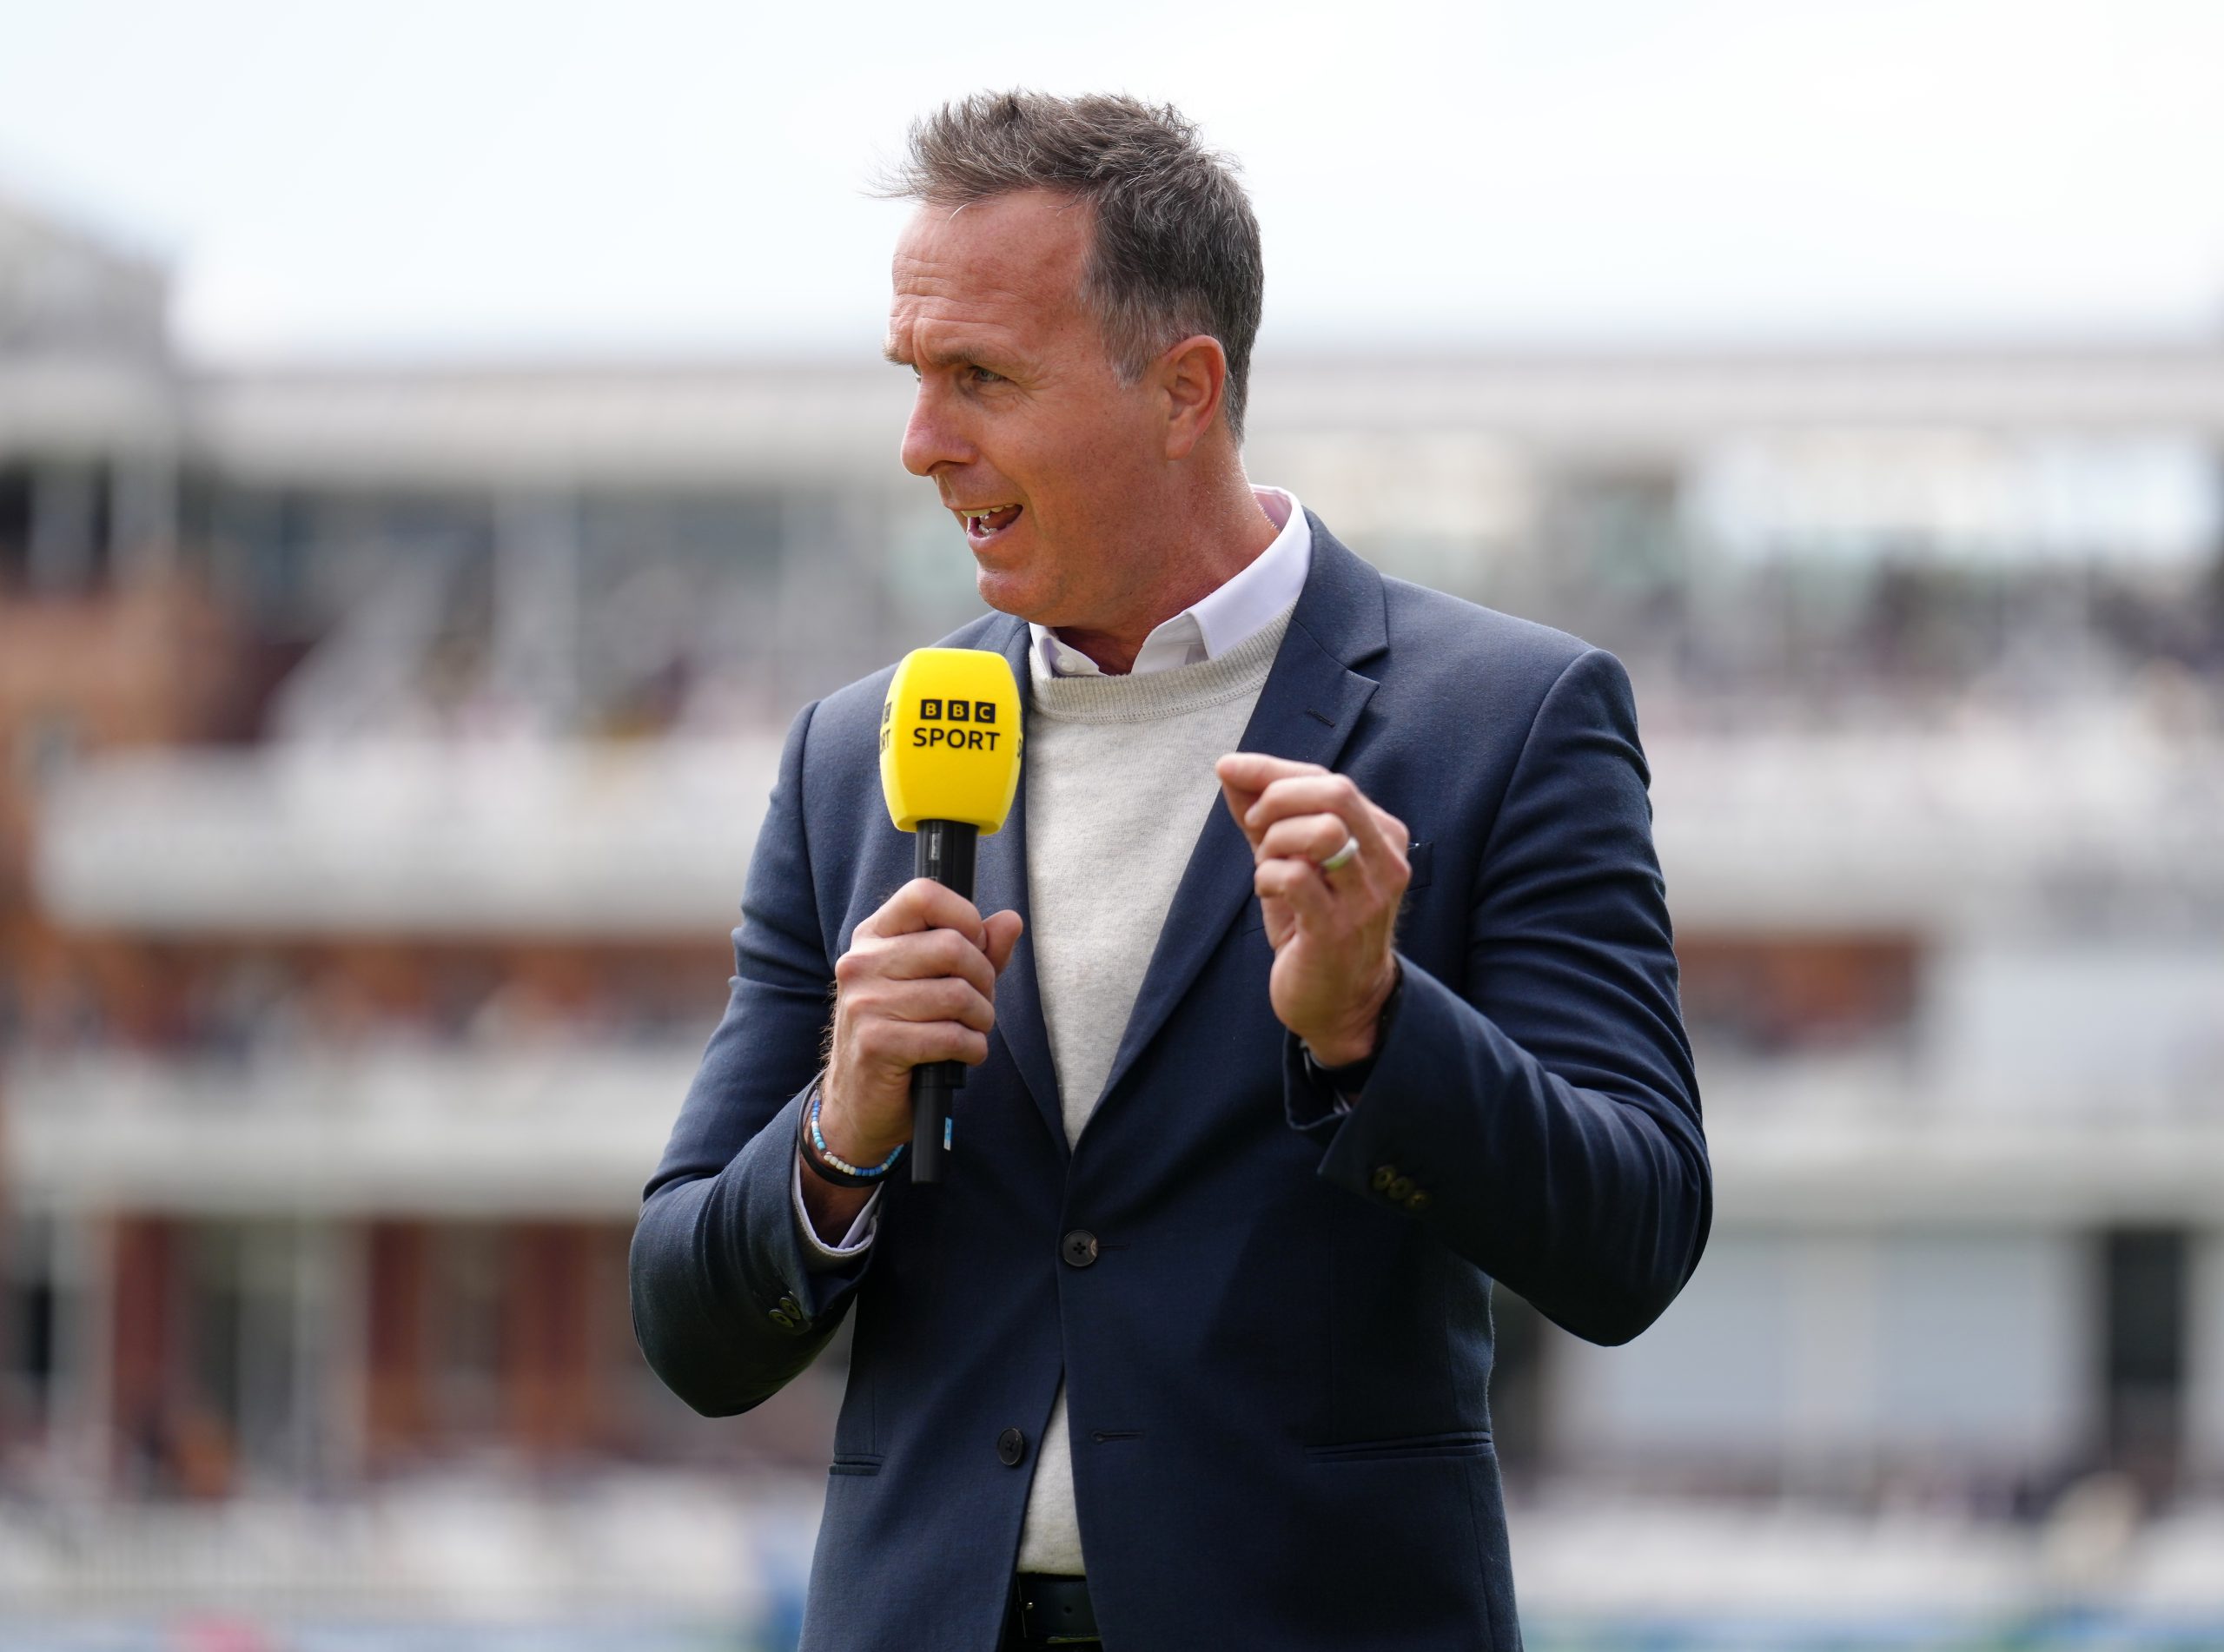 Michael Vaughan calls England approach ‘silly and stupid’ after batting collapse